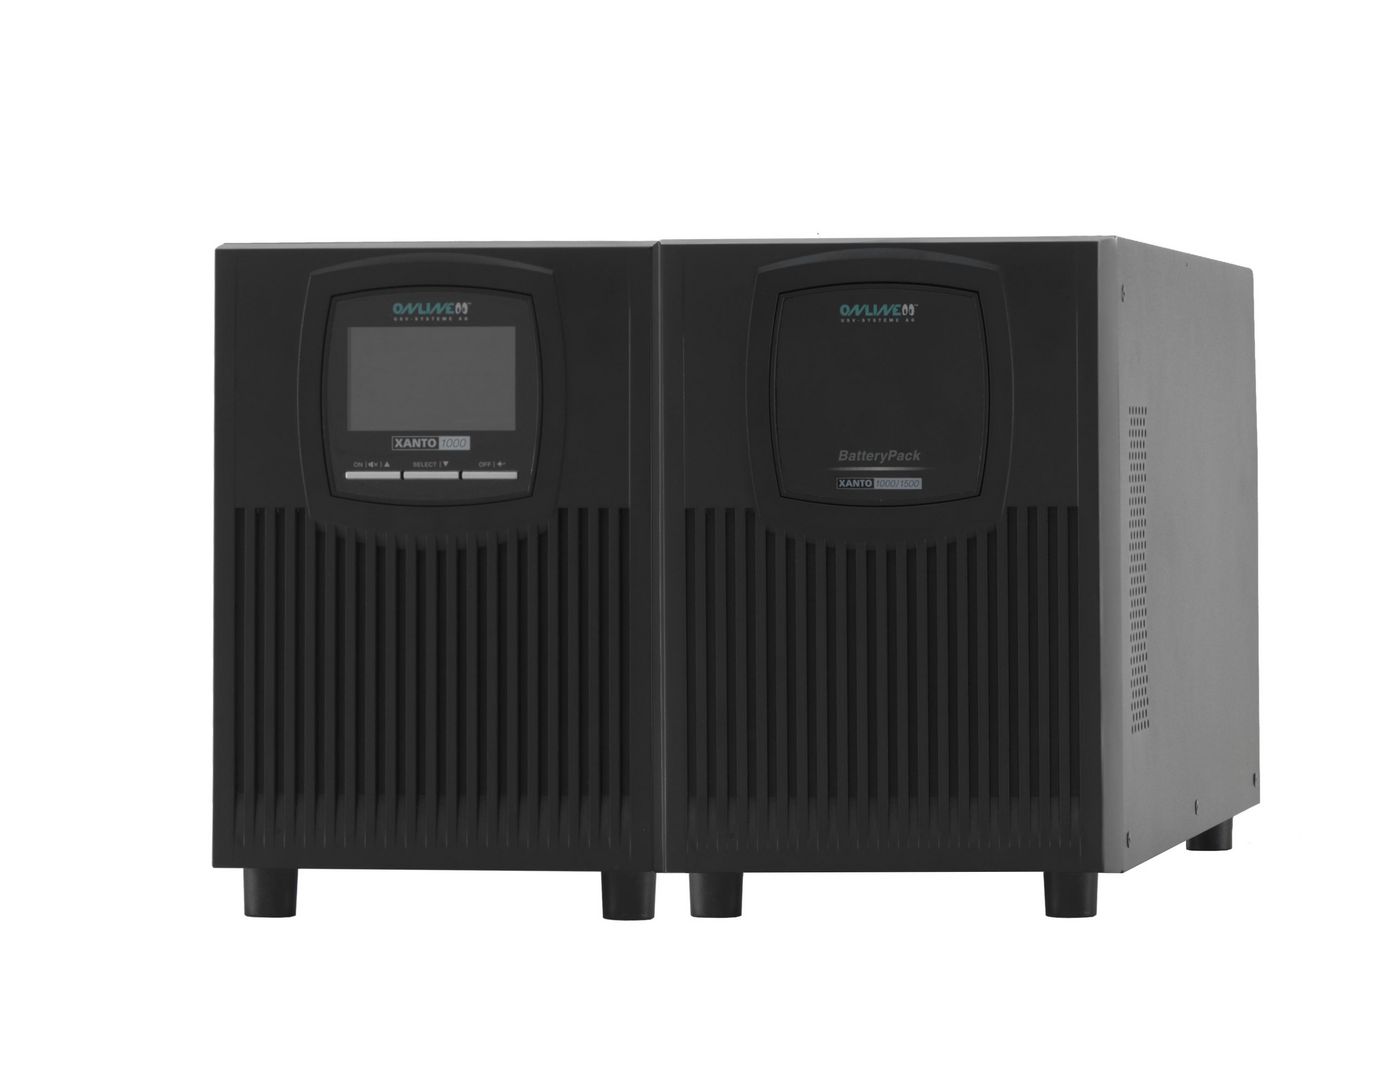 Online-USV-Systeme X1000BP W128270393 Ups Battery Cabinet Tower 